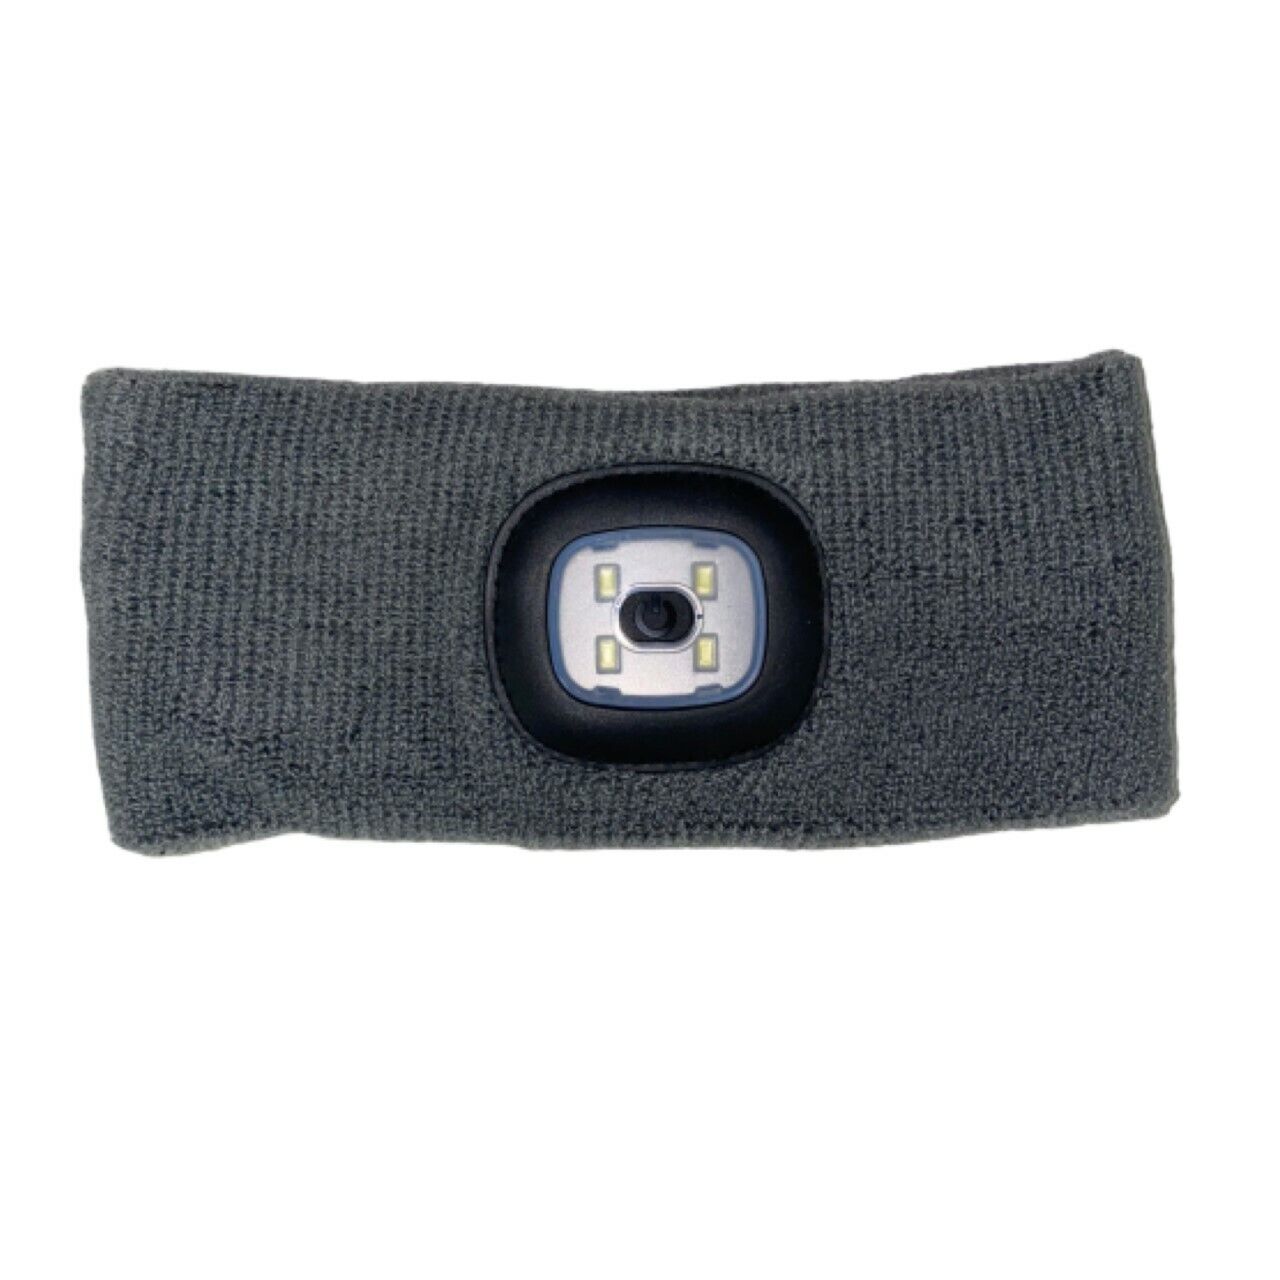 Head Band with Built In 4 SMD Light - Walking - Camping- Running 3 Brightness